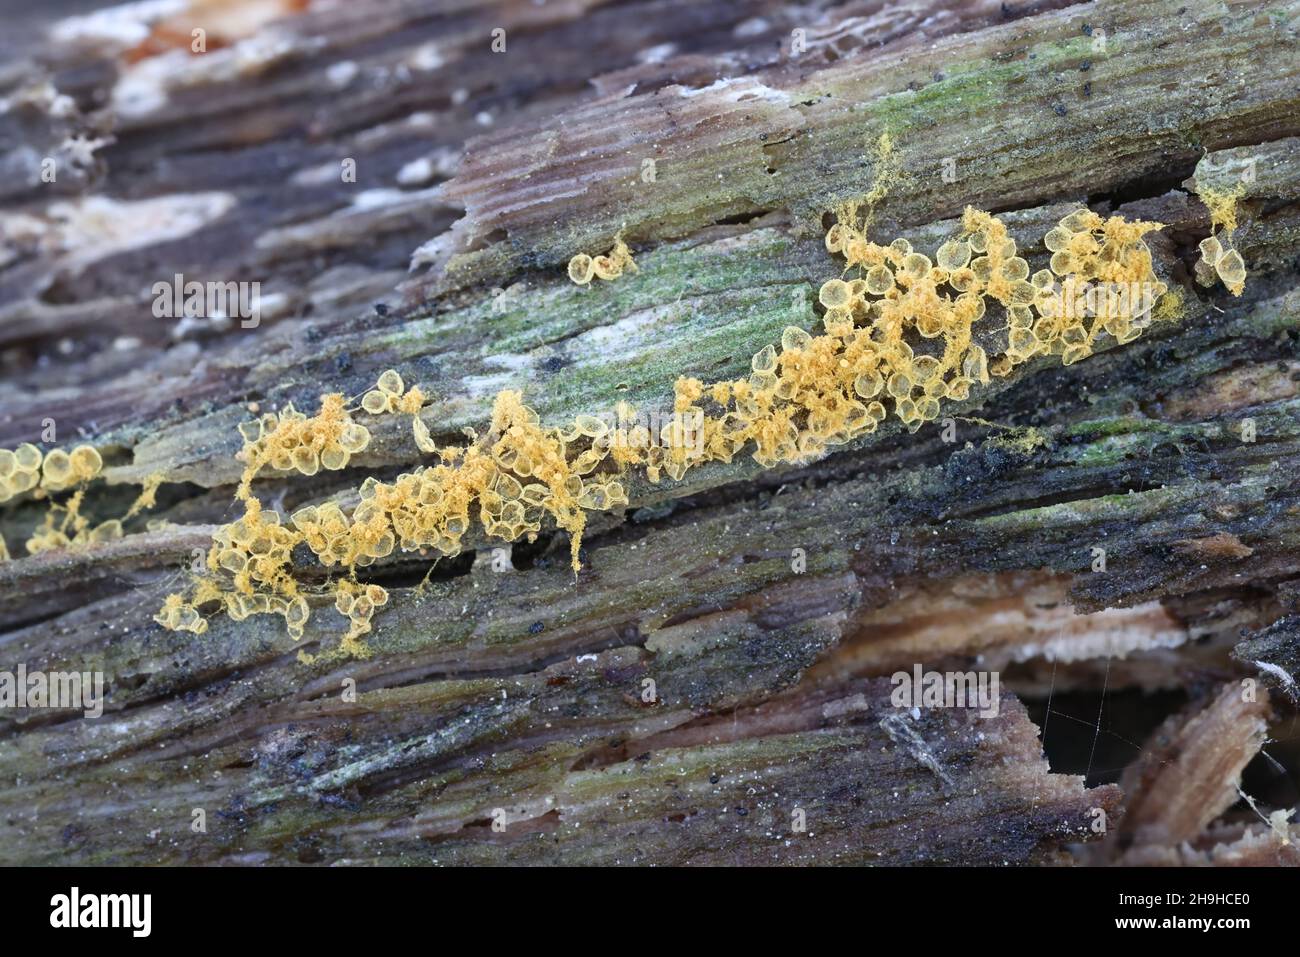 Hemitrichia abietina, also called Trichia abietina, a slime mold from Finland, no common English name Stock Photo